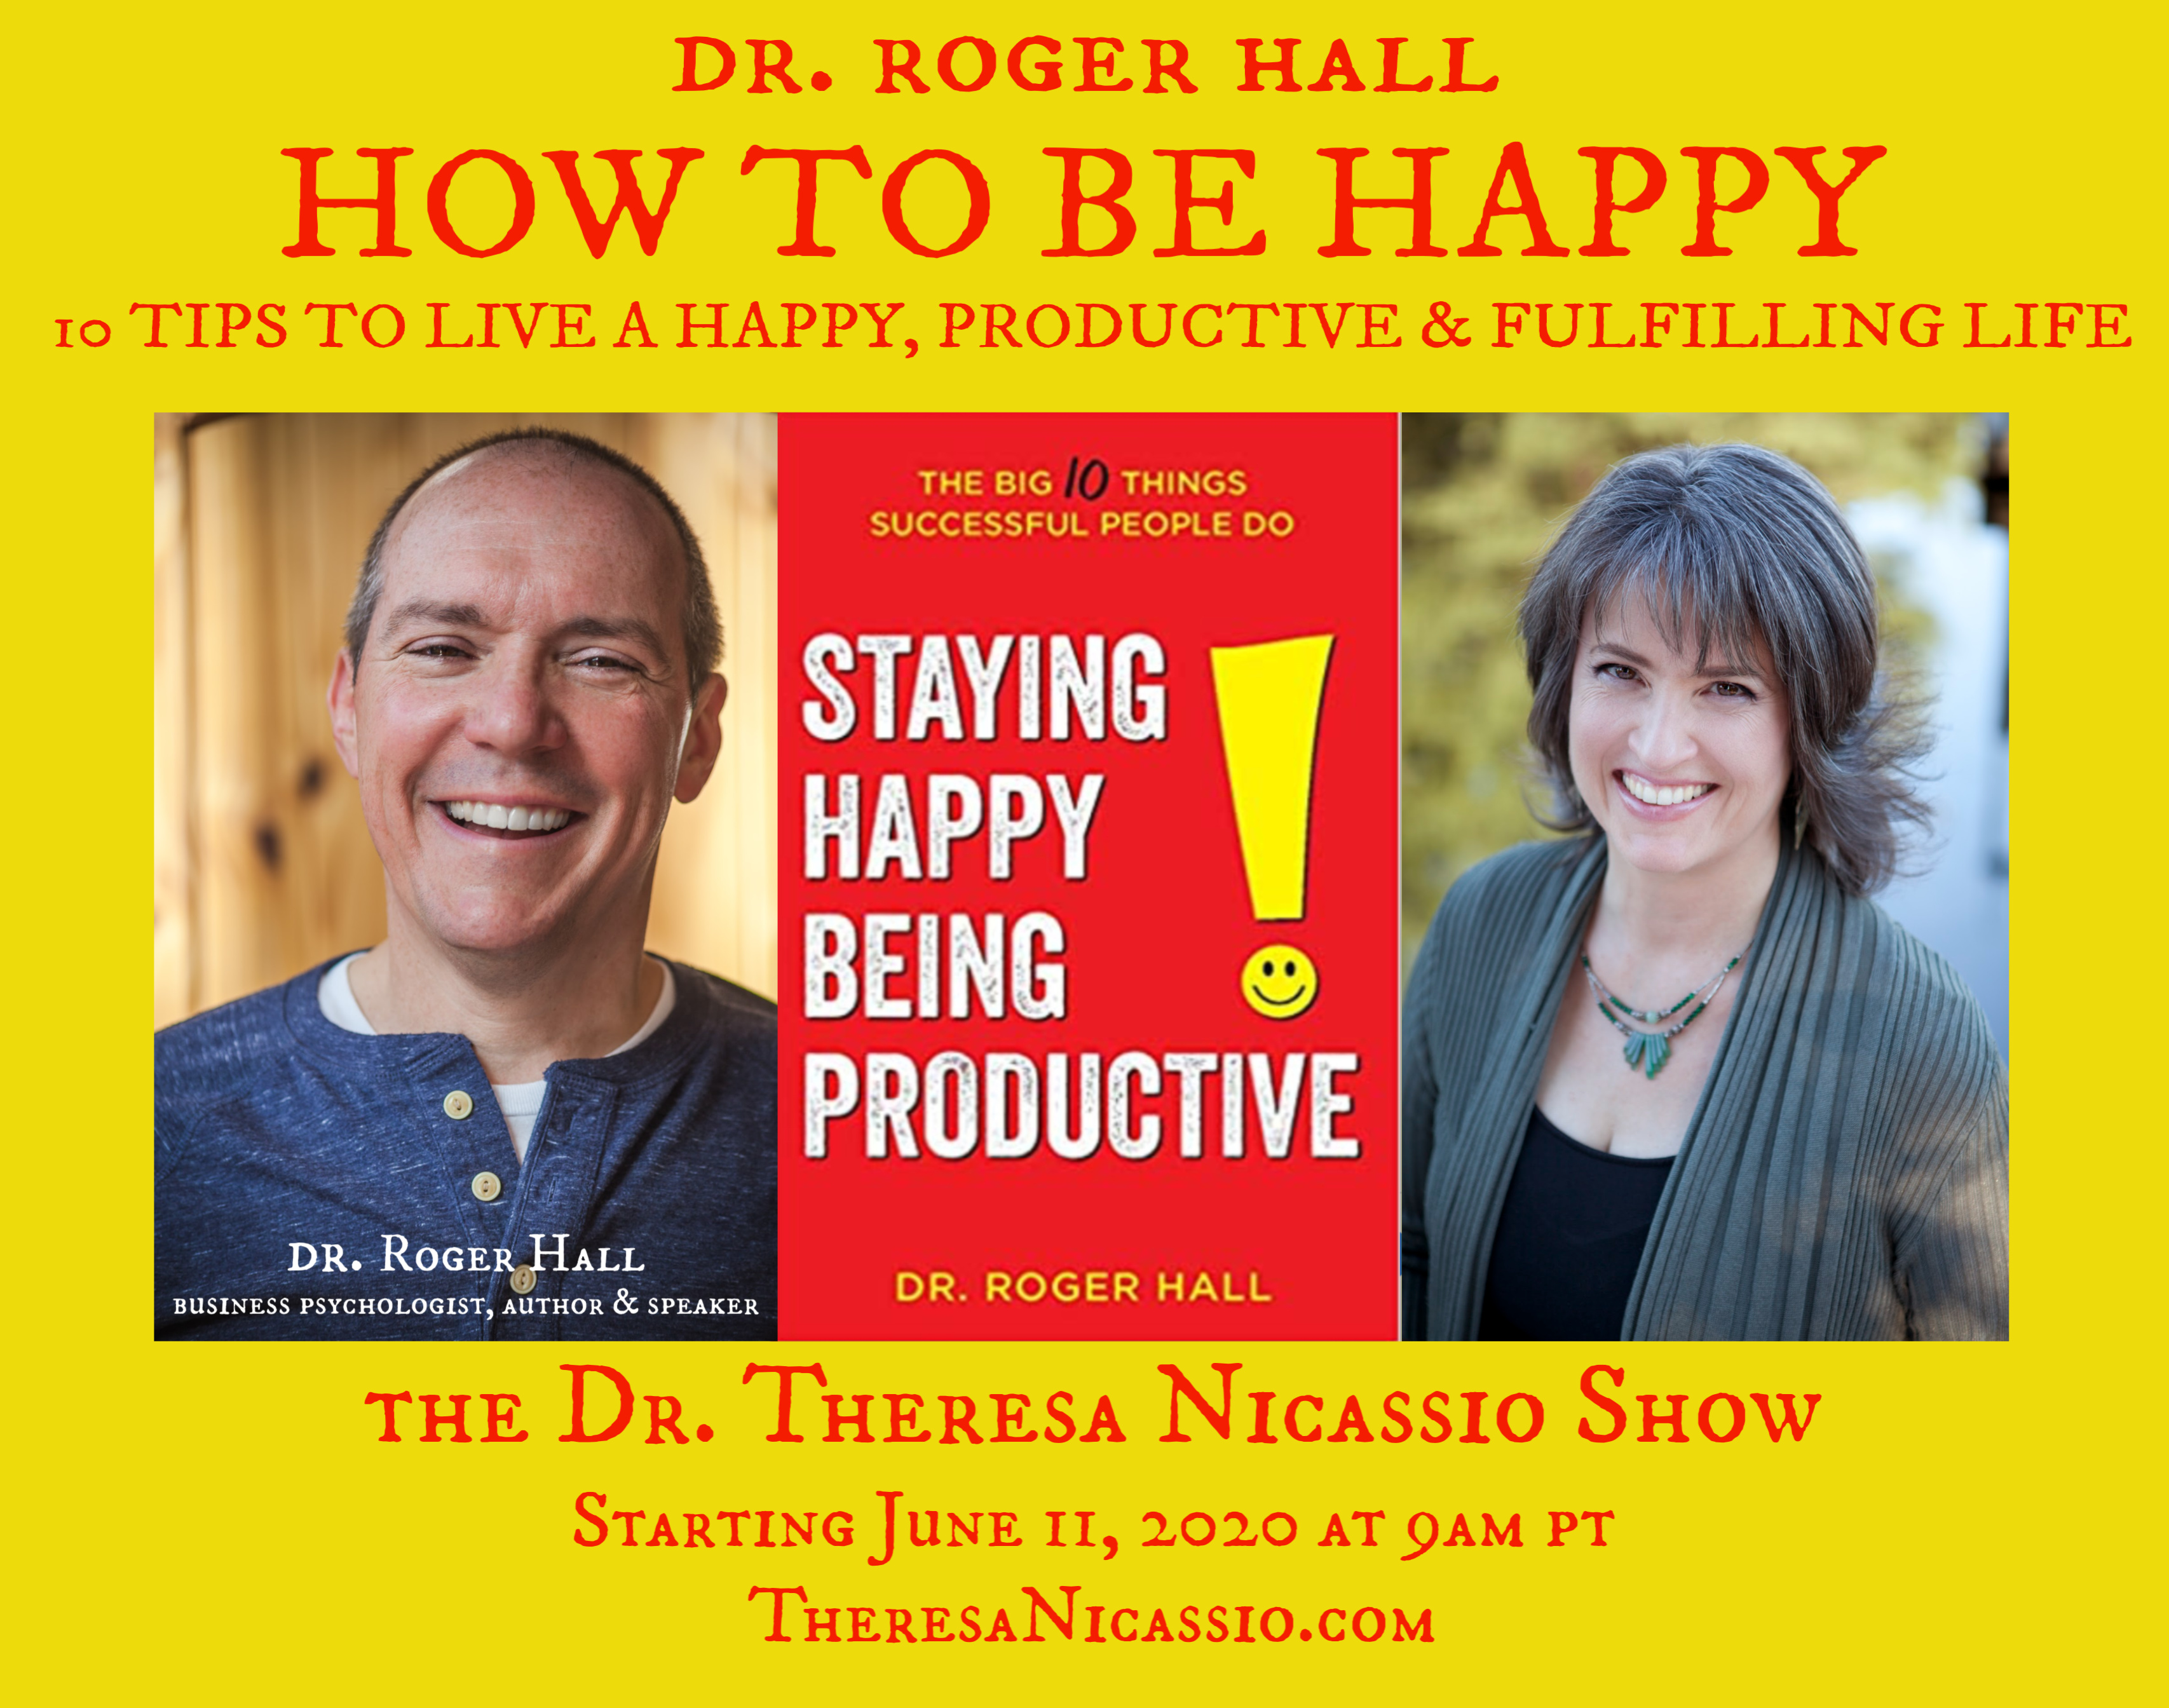 HOW TO BE HAPPY with Dr. Roger Hall on The Dr. Theresa Nicassio Show on Healthy Life Radio